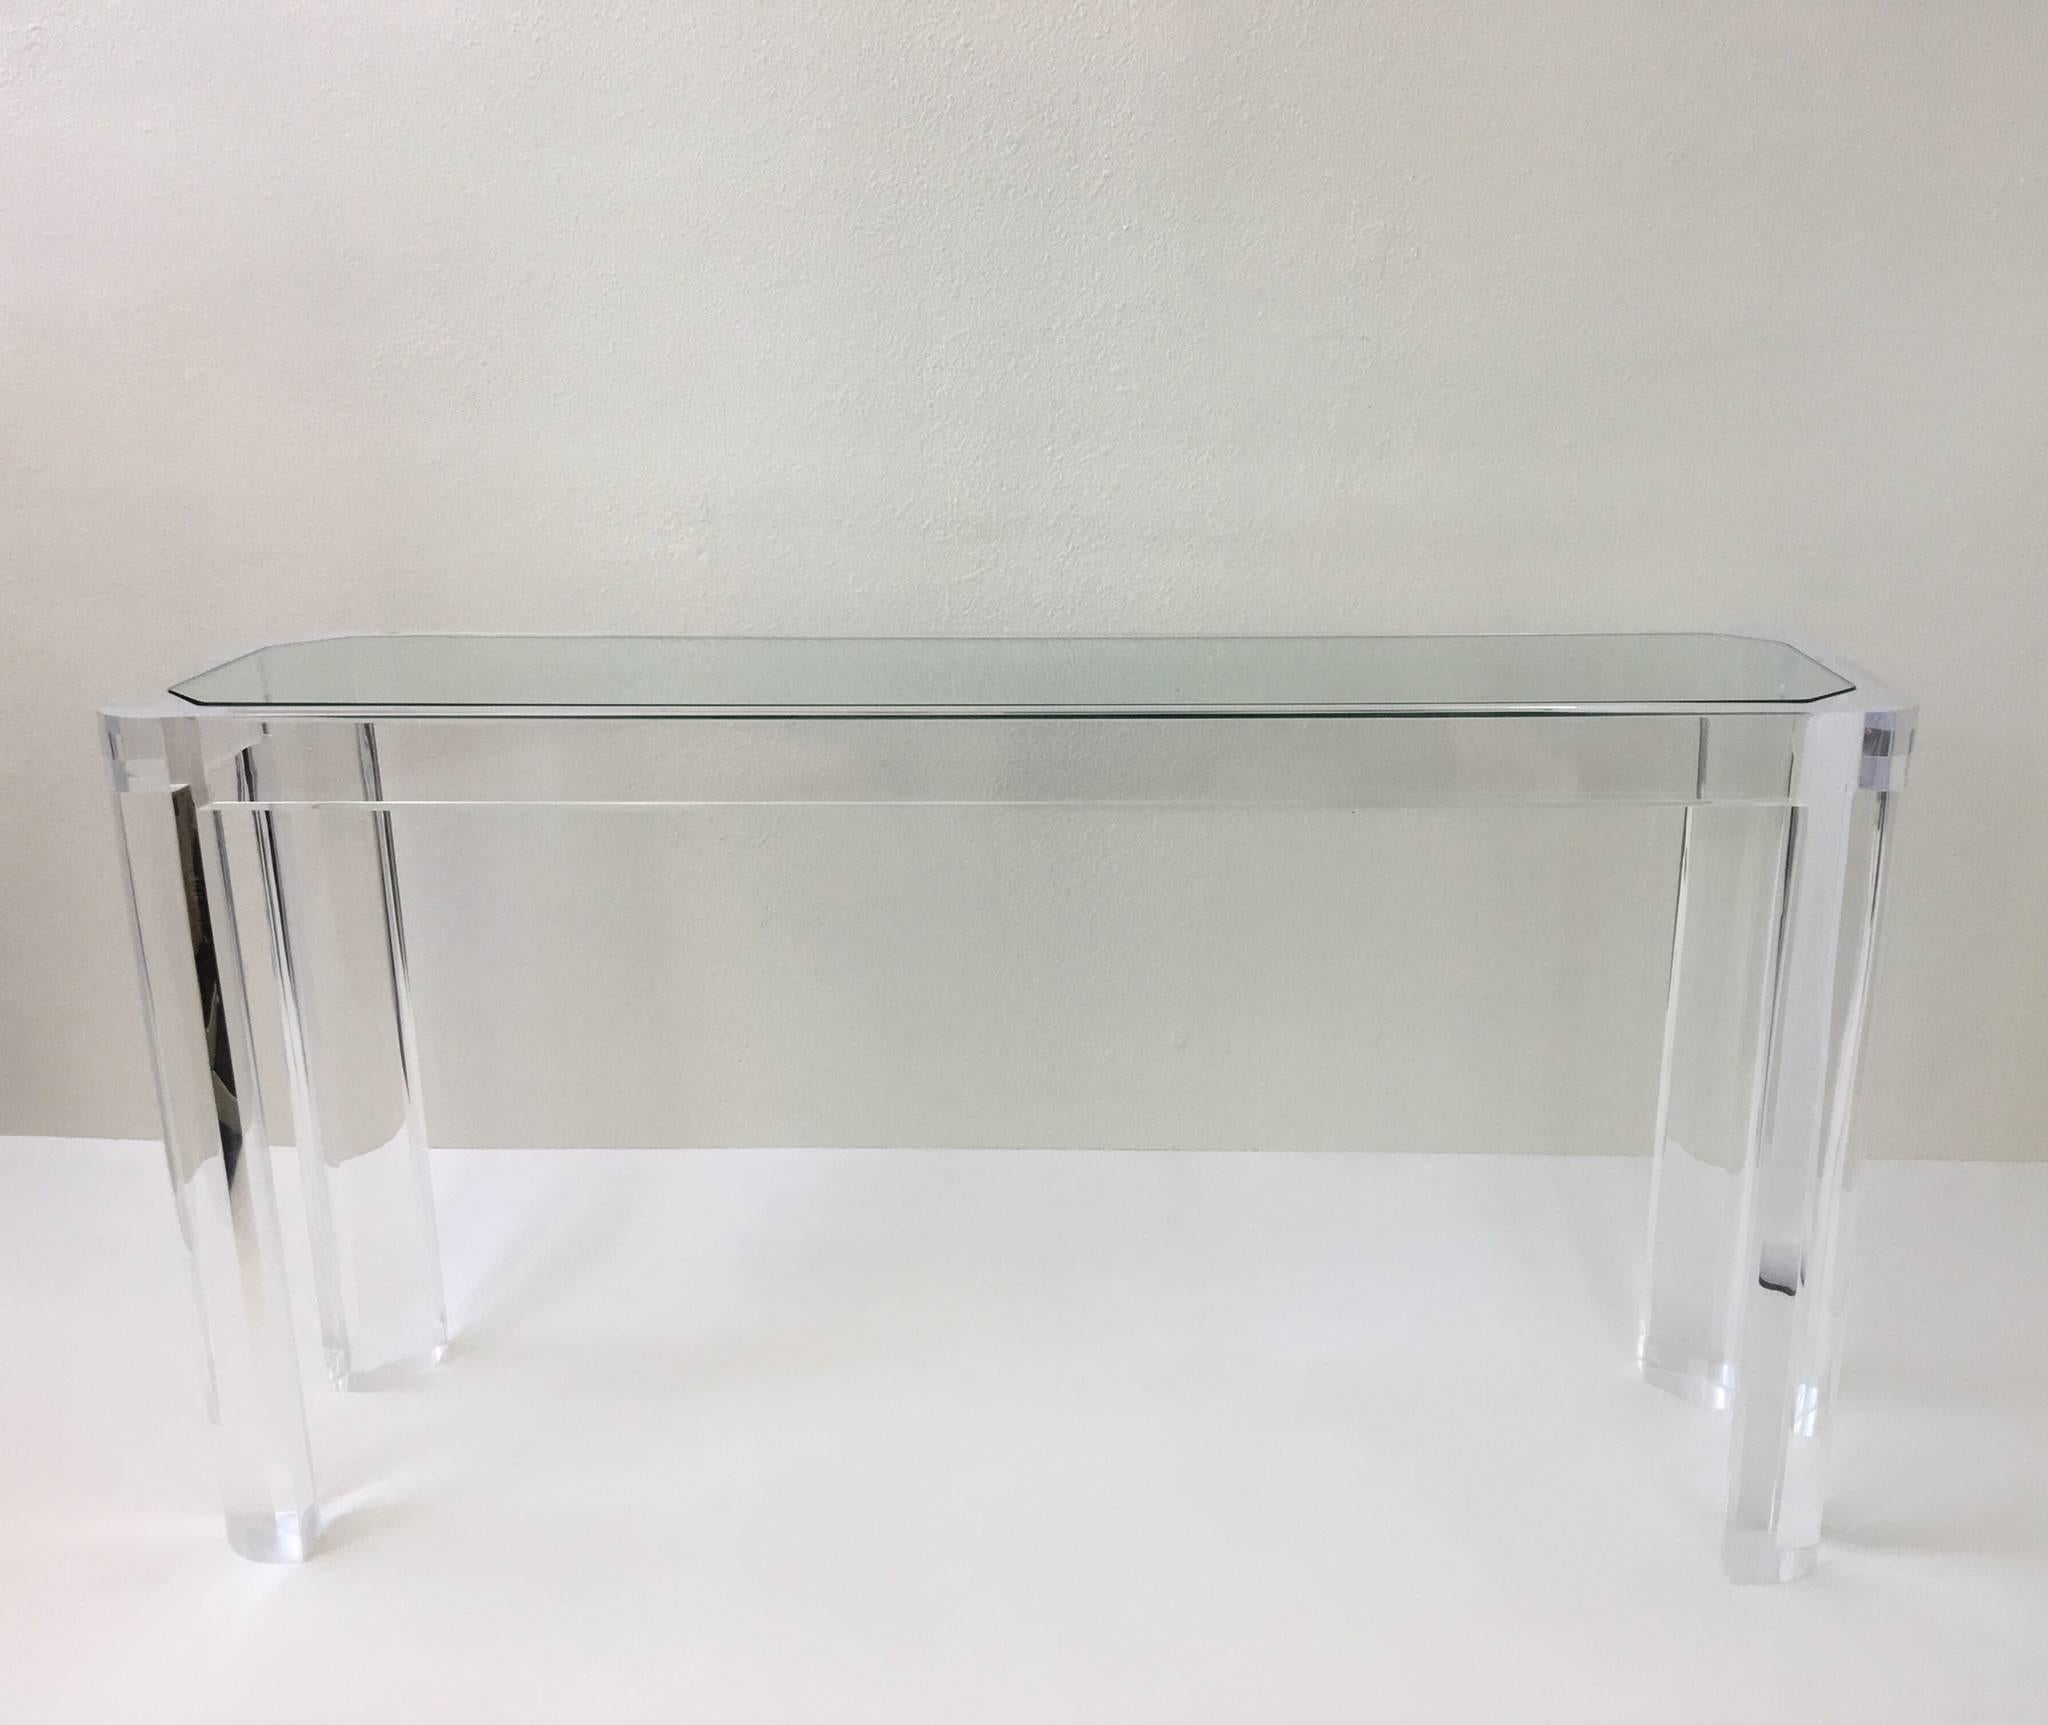 An amazing clear acrylic and glass console table by Les Prismatiques.
The table is constructed of thick clear acrylic with a 1/2